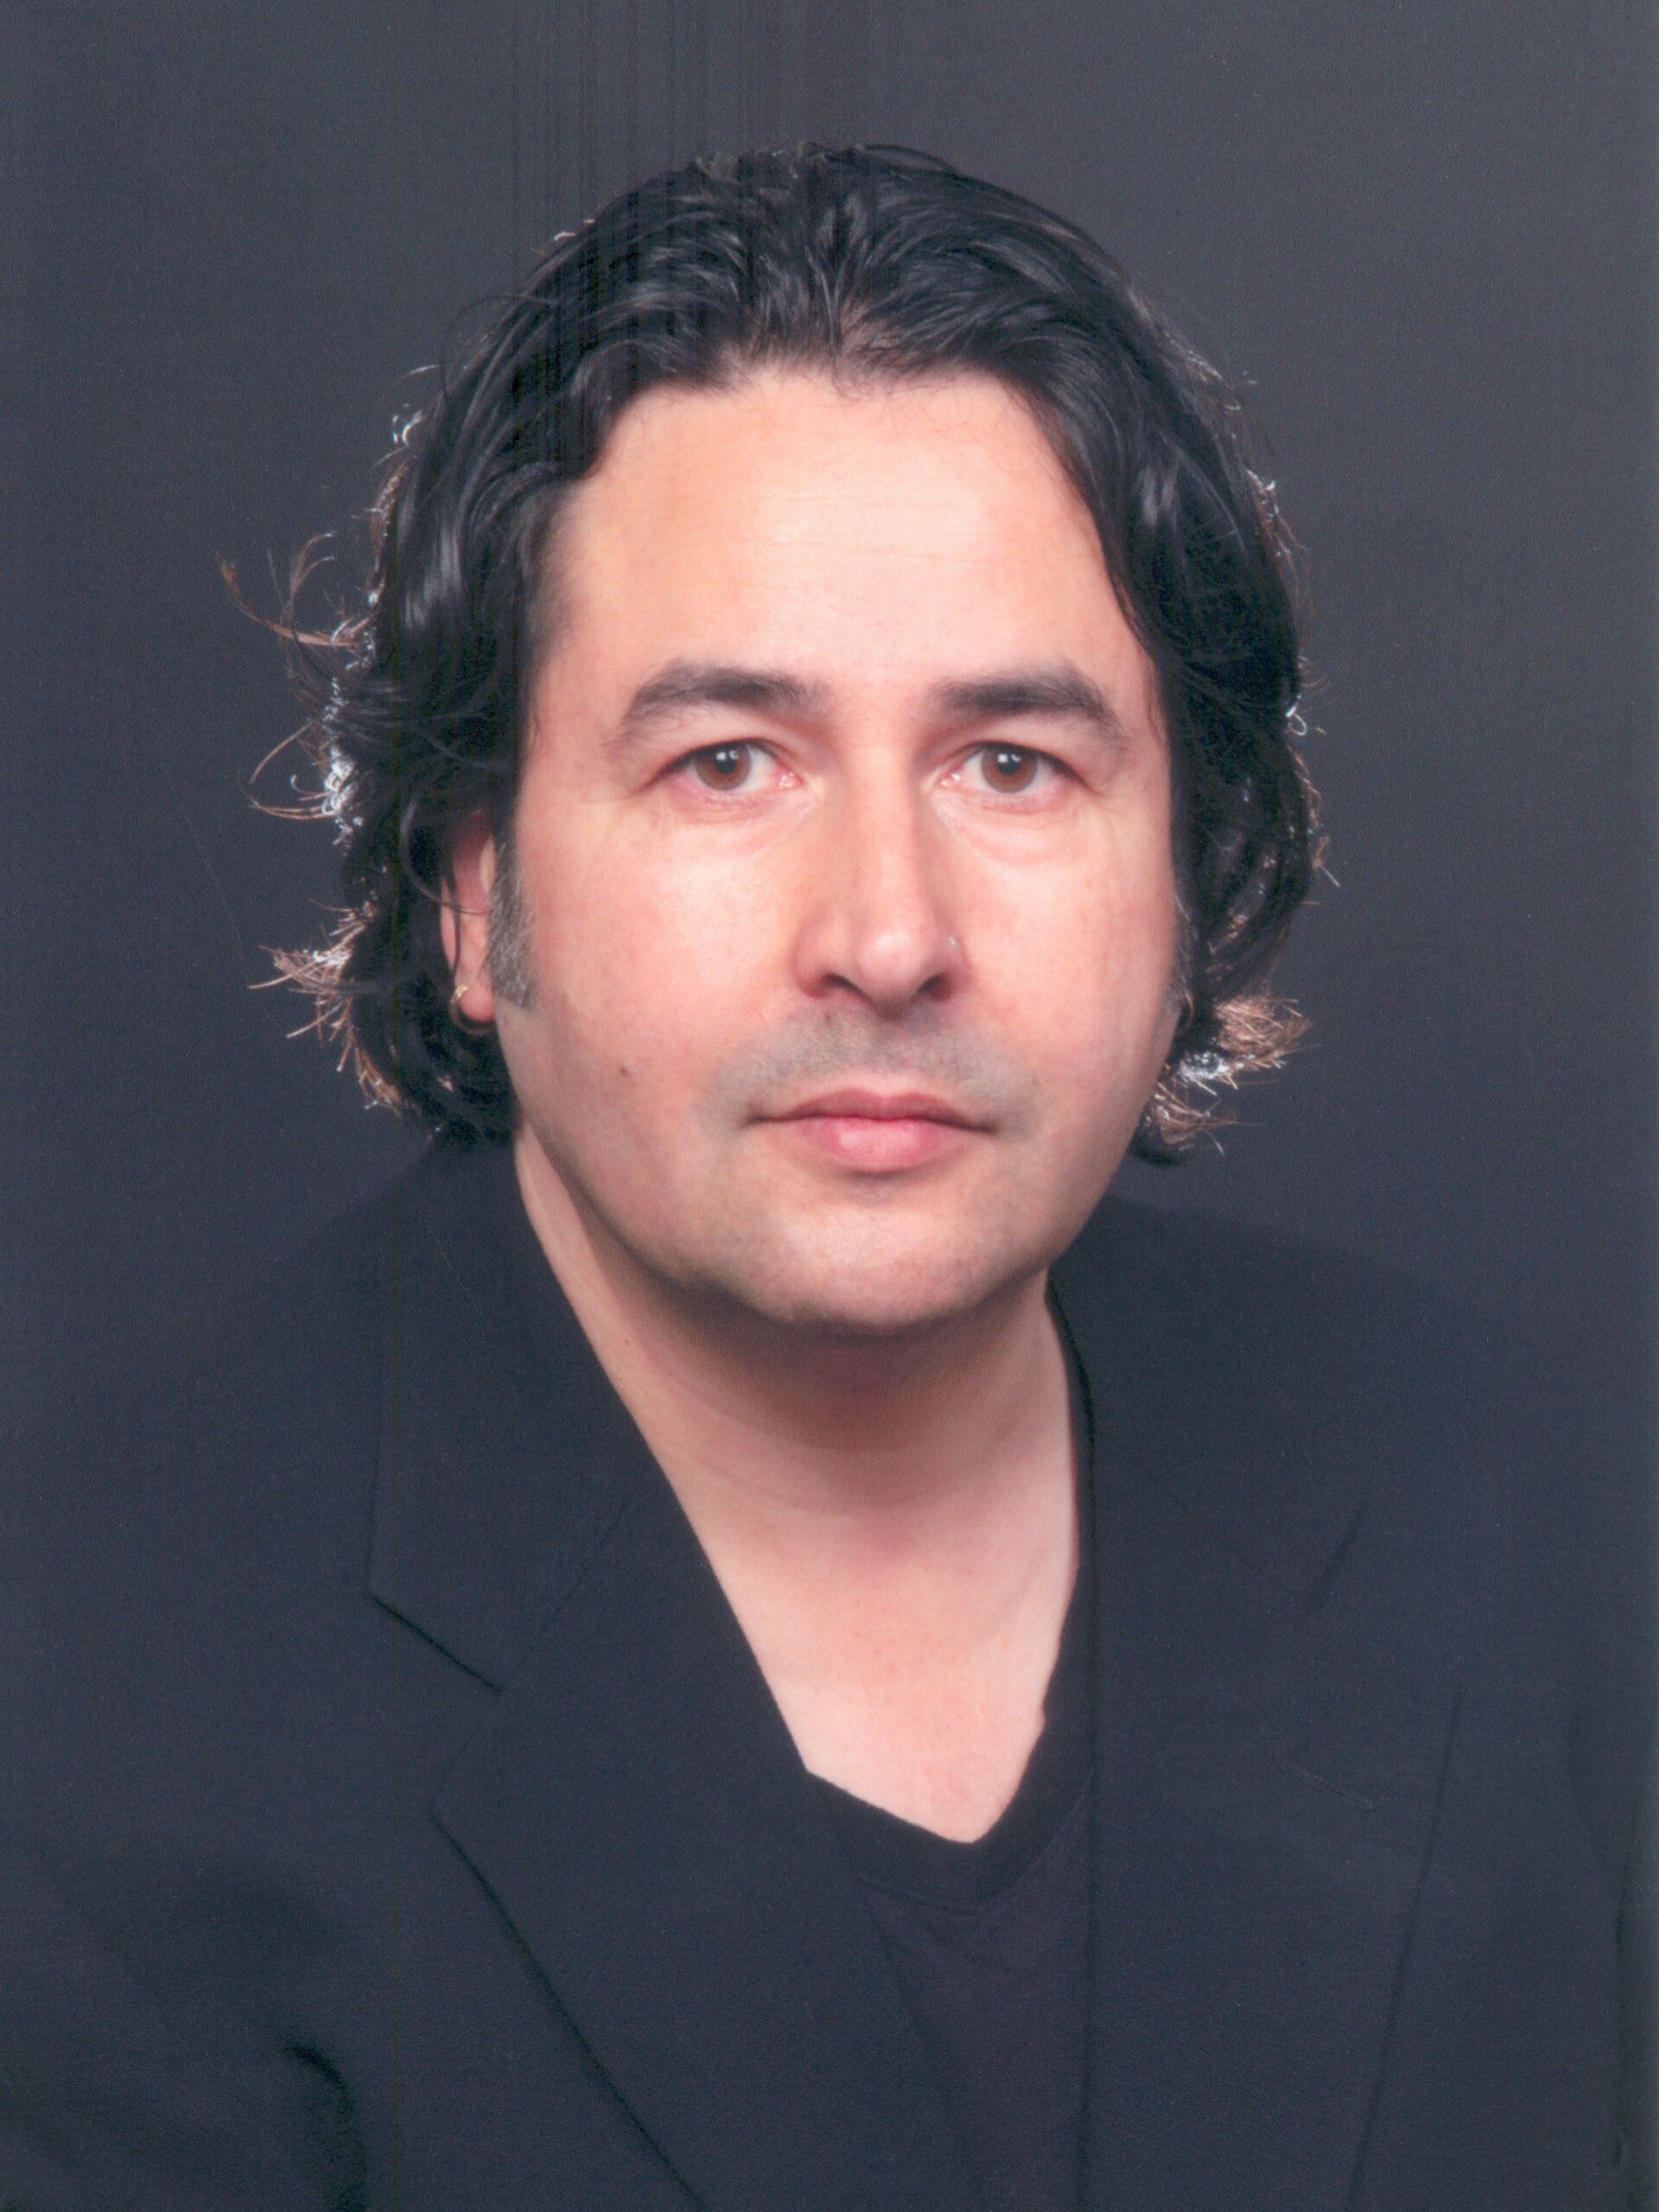 Composer Andriàn Pertout, whose work <i>Mīmēsis</i> will be performed as part of <i>The ANAM Set</i>.